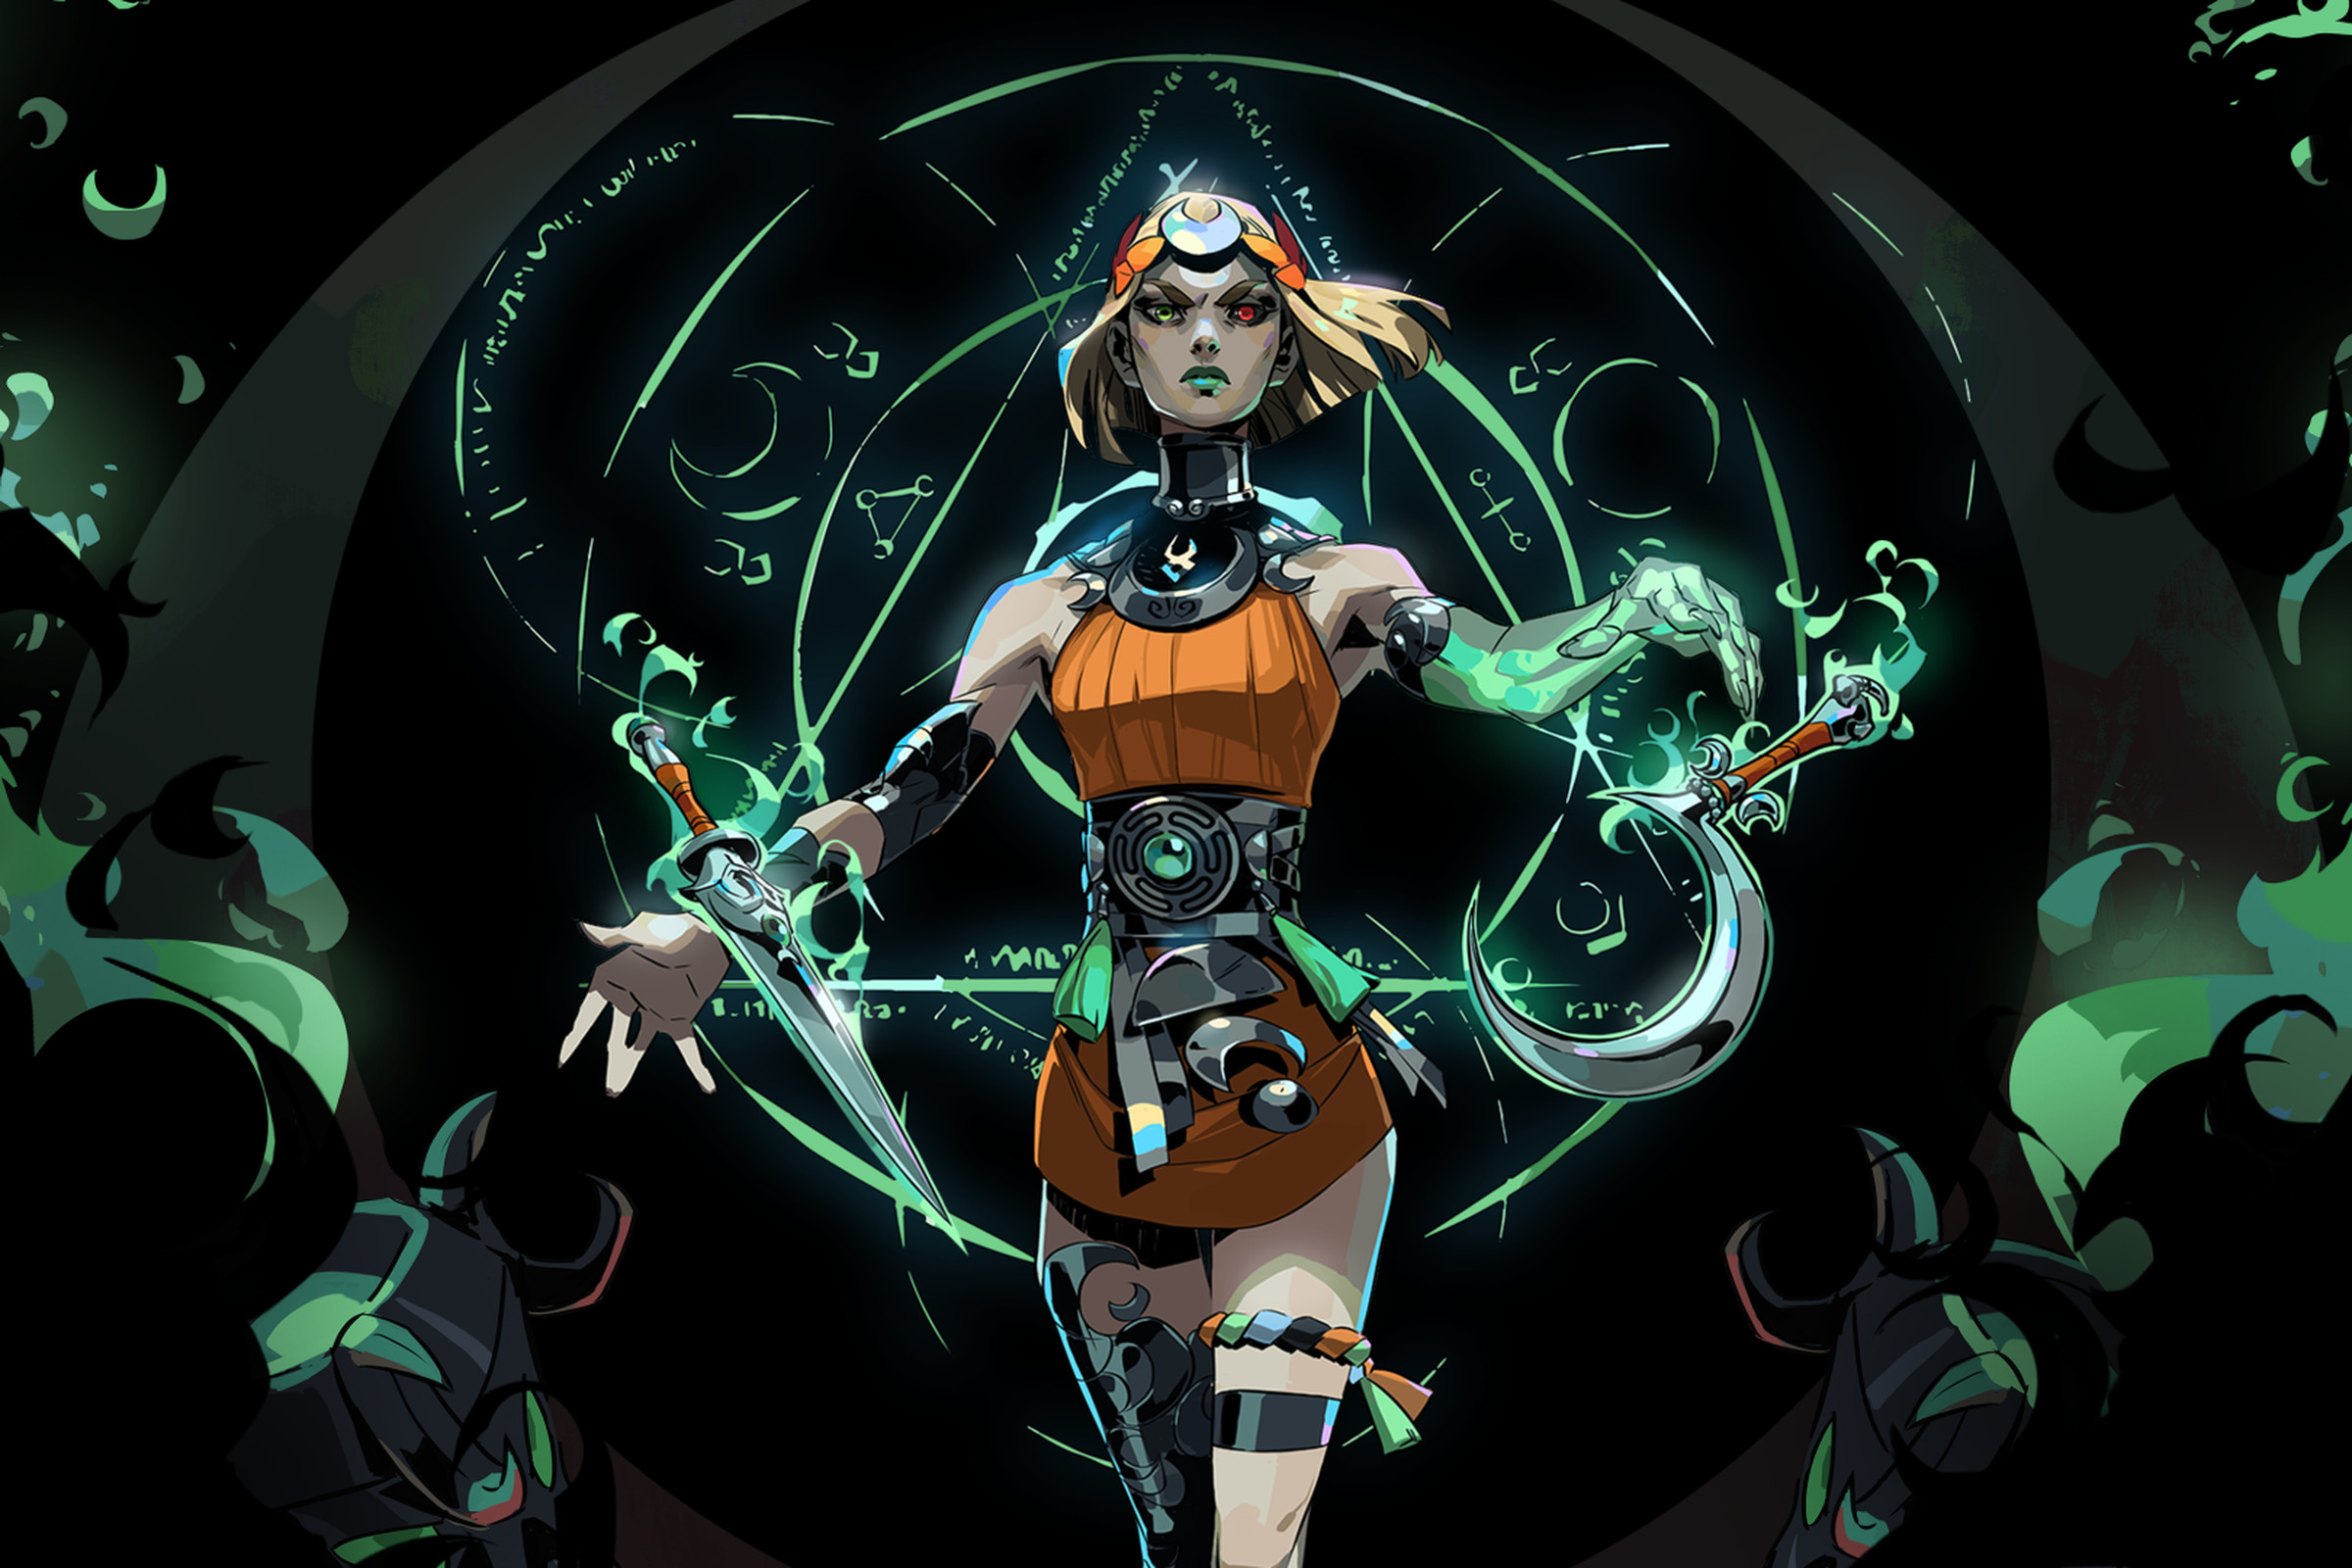 Key art from Hades 2 featuring the protagonist Melinoë, a young woman with bicolor eyes and green, glowing arm.